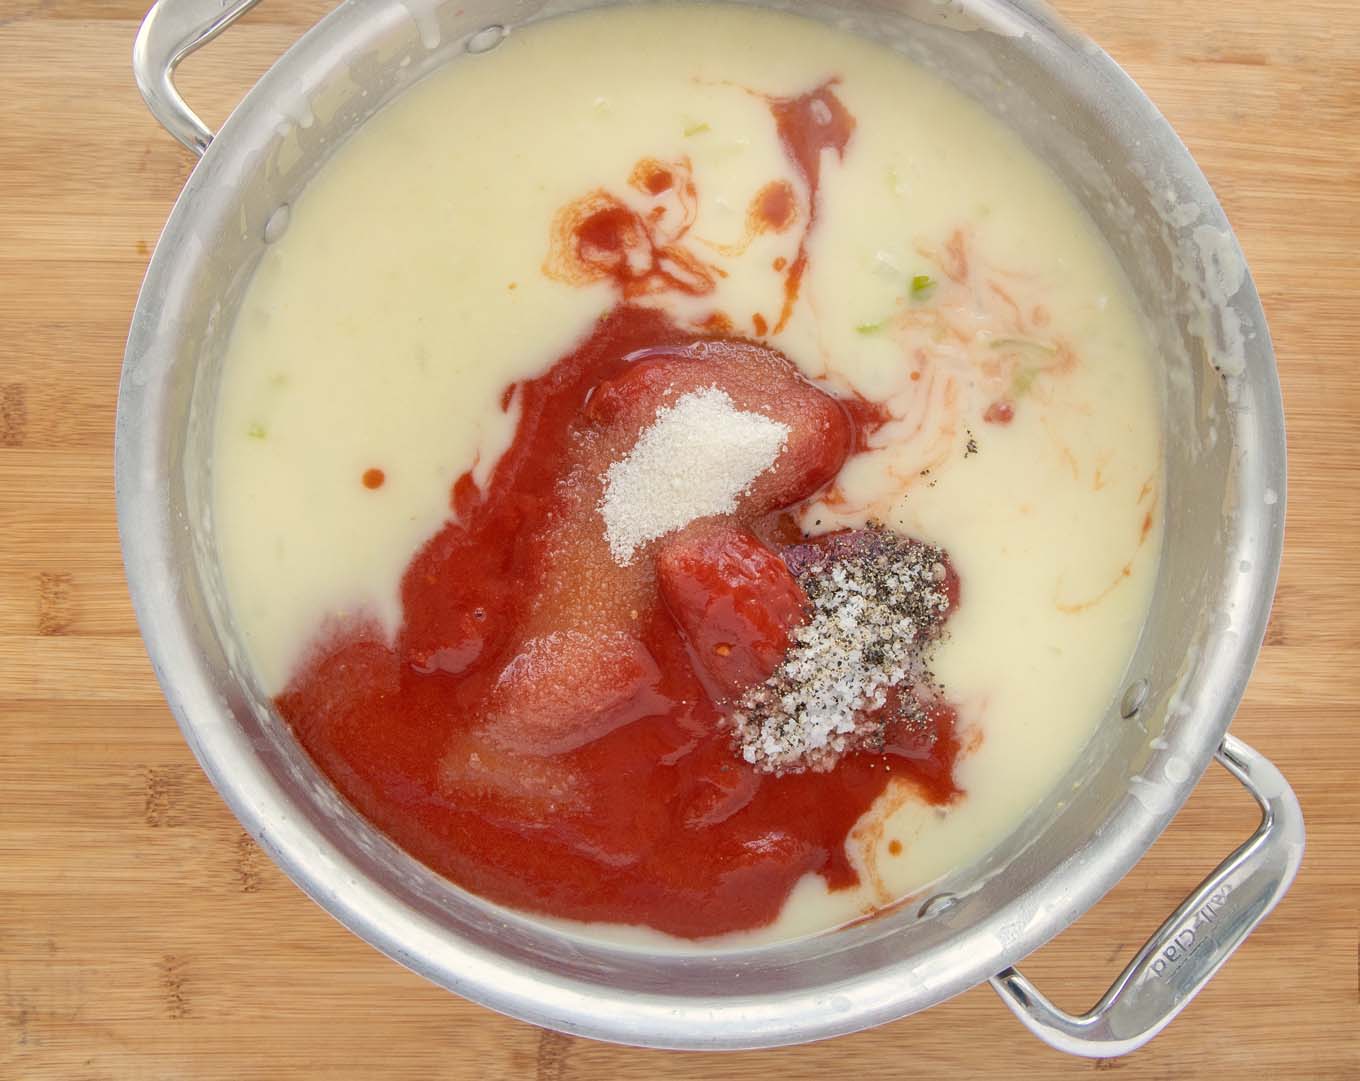 Veloute with tomatoes and seasonings in a large pot